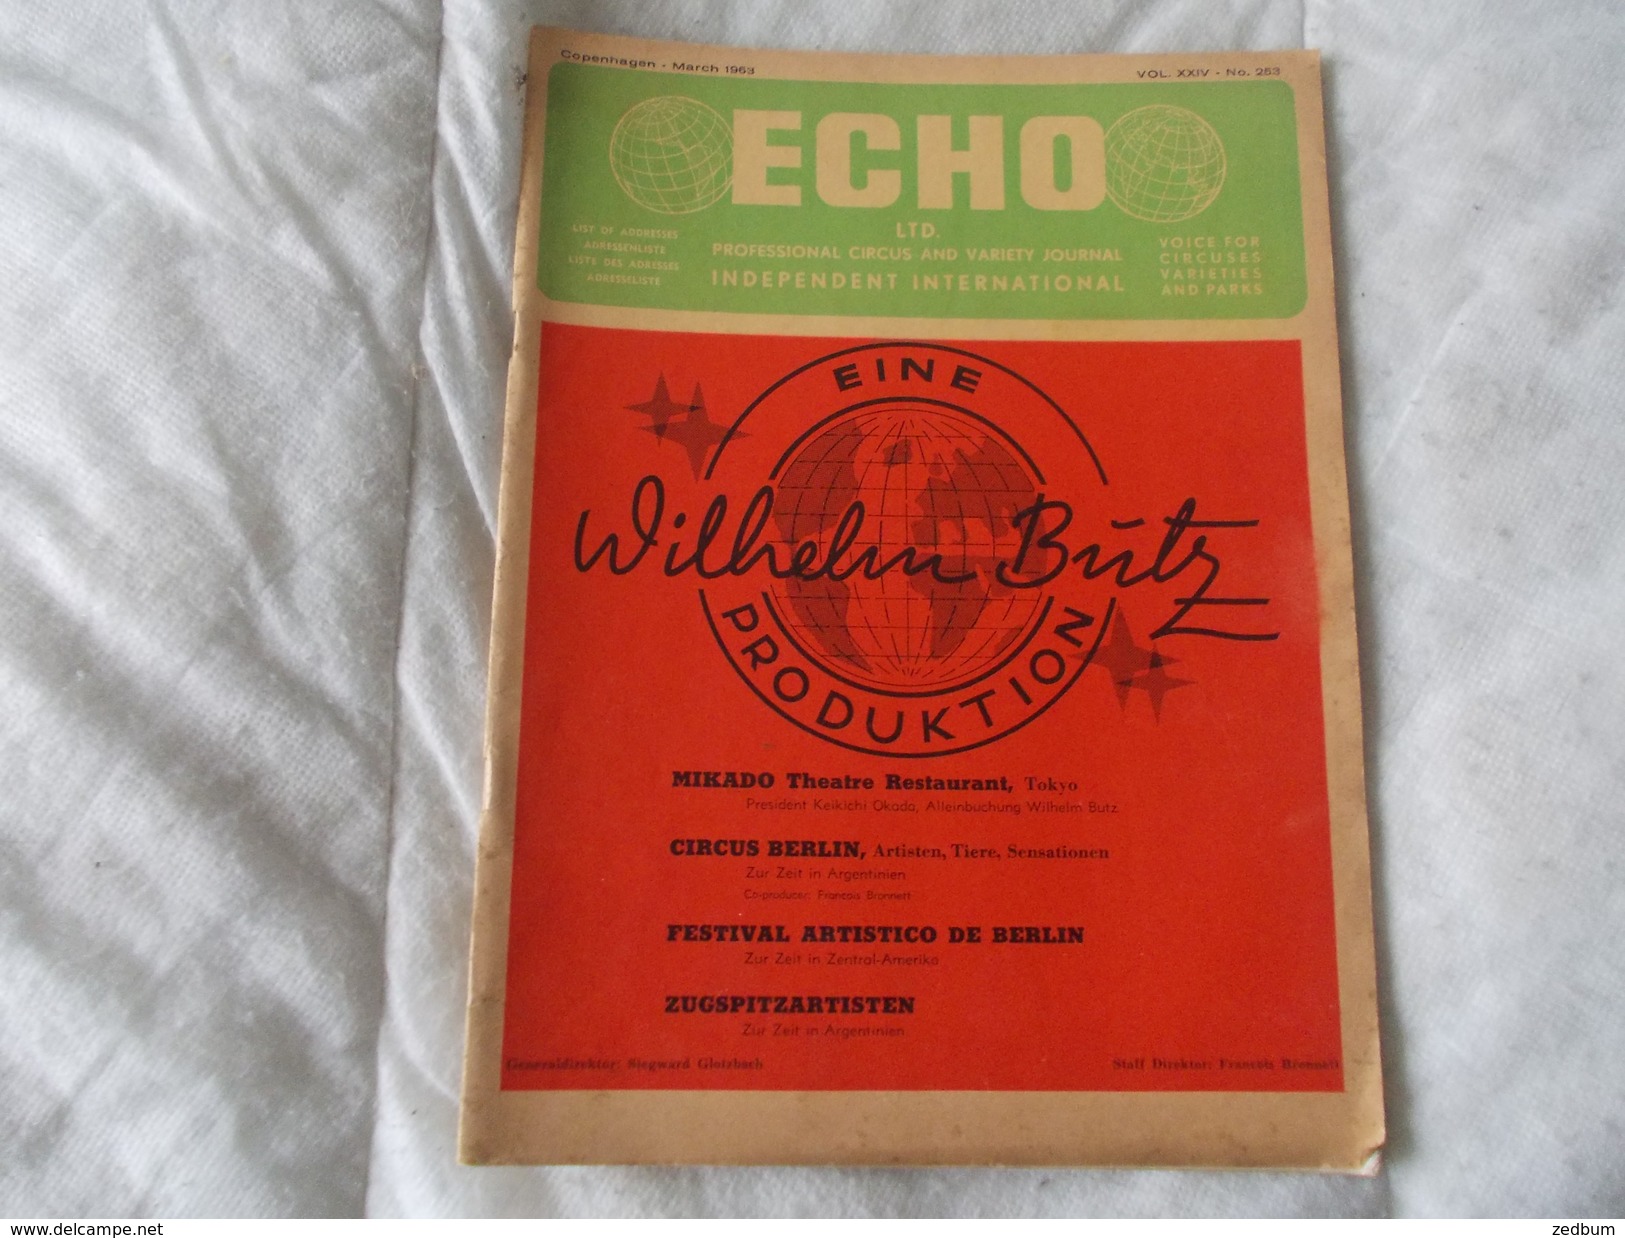 ECHO LTD Professional Circus And Variety Journal Independent International N° 253 March 1963 - Entretenimiento